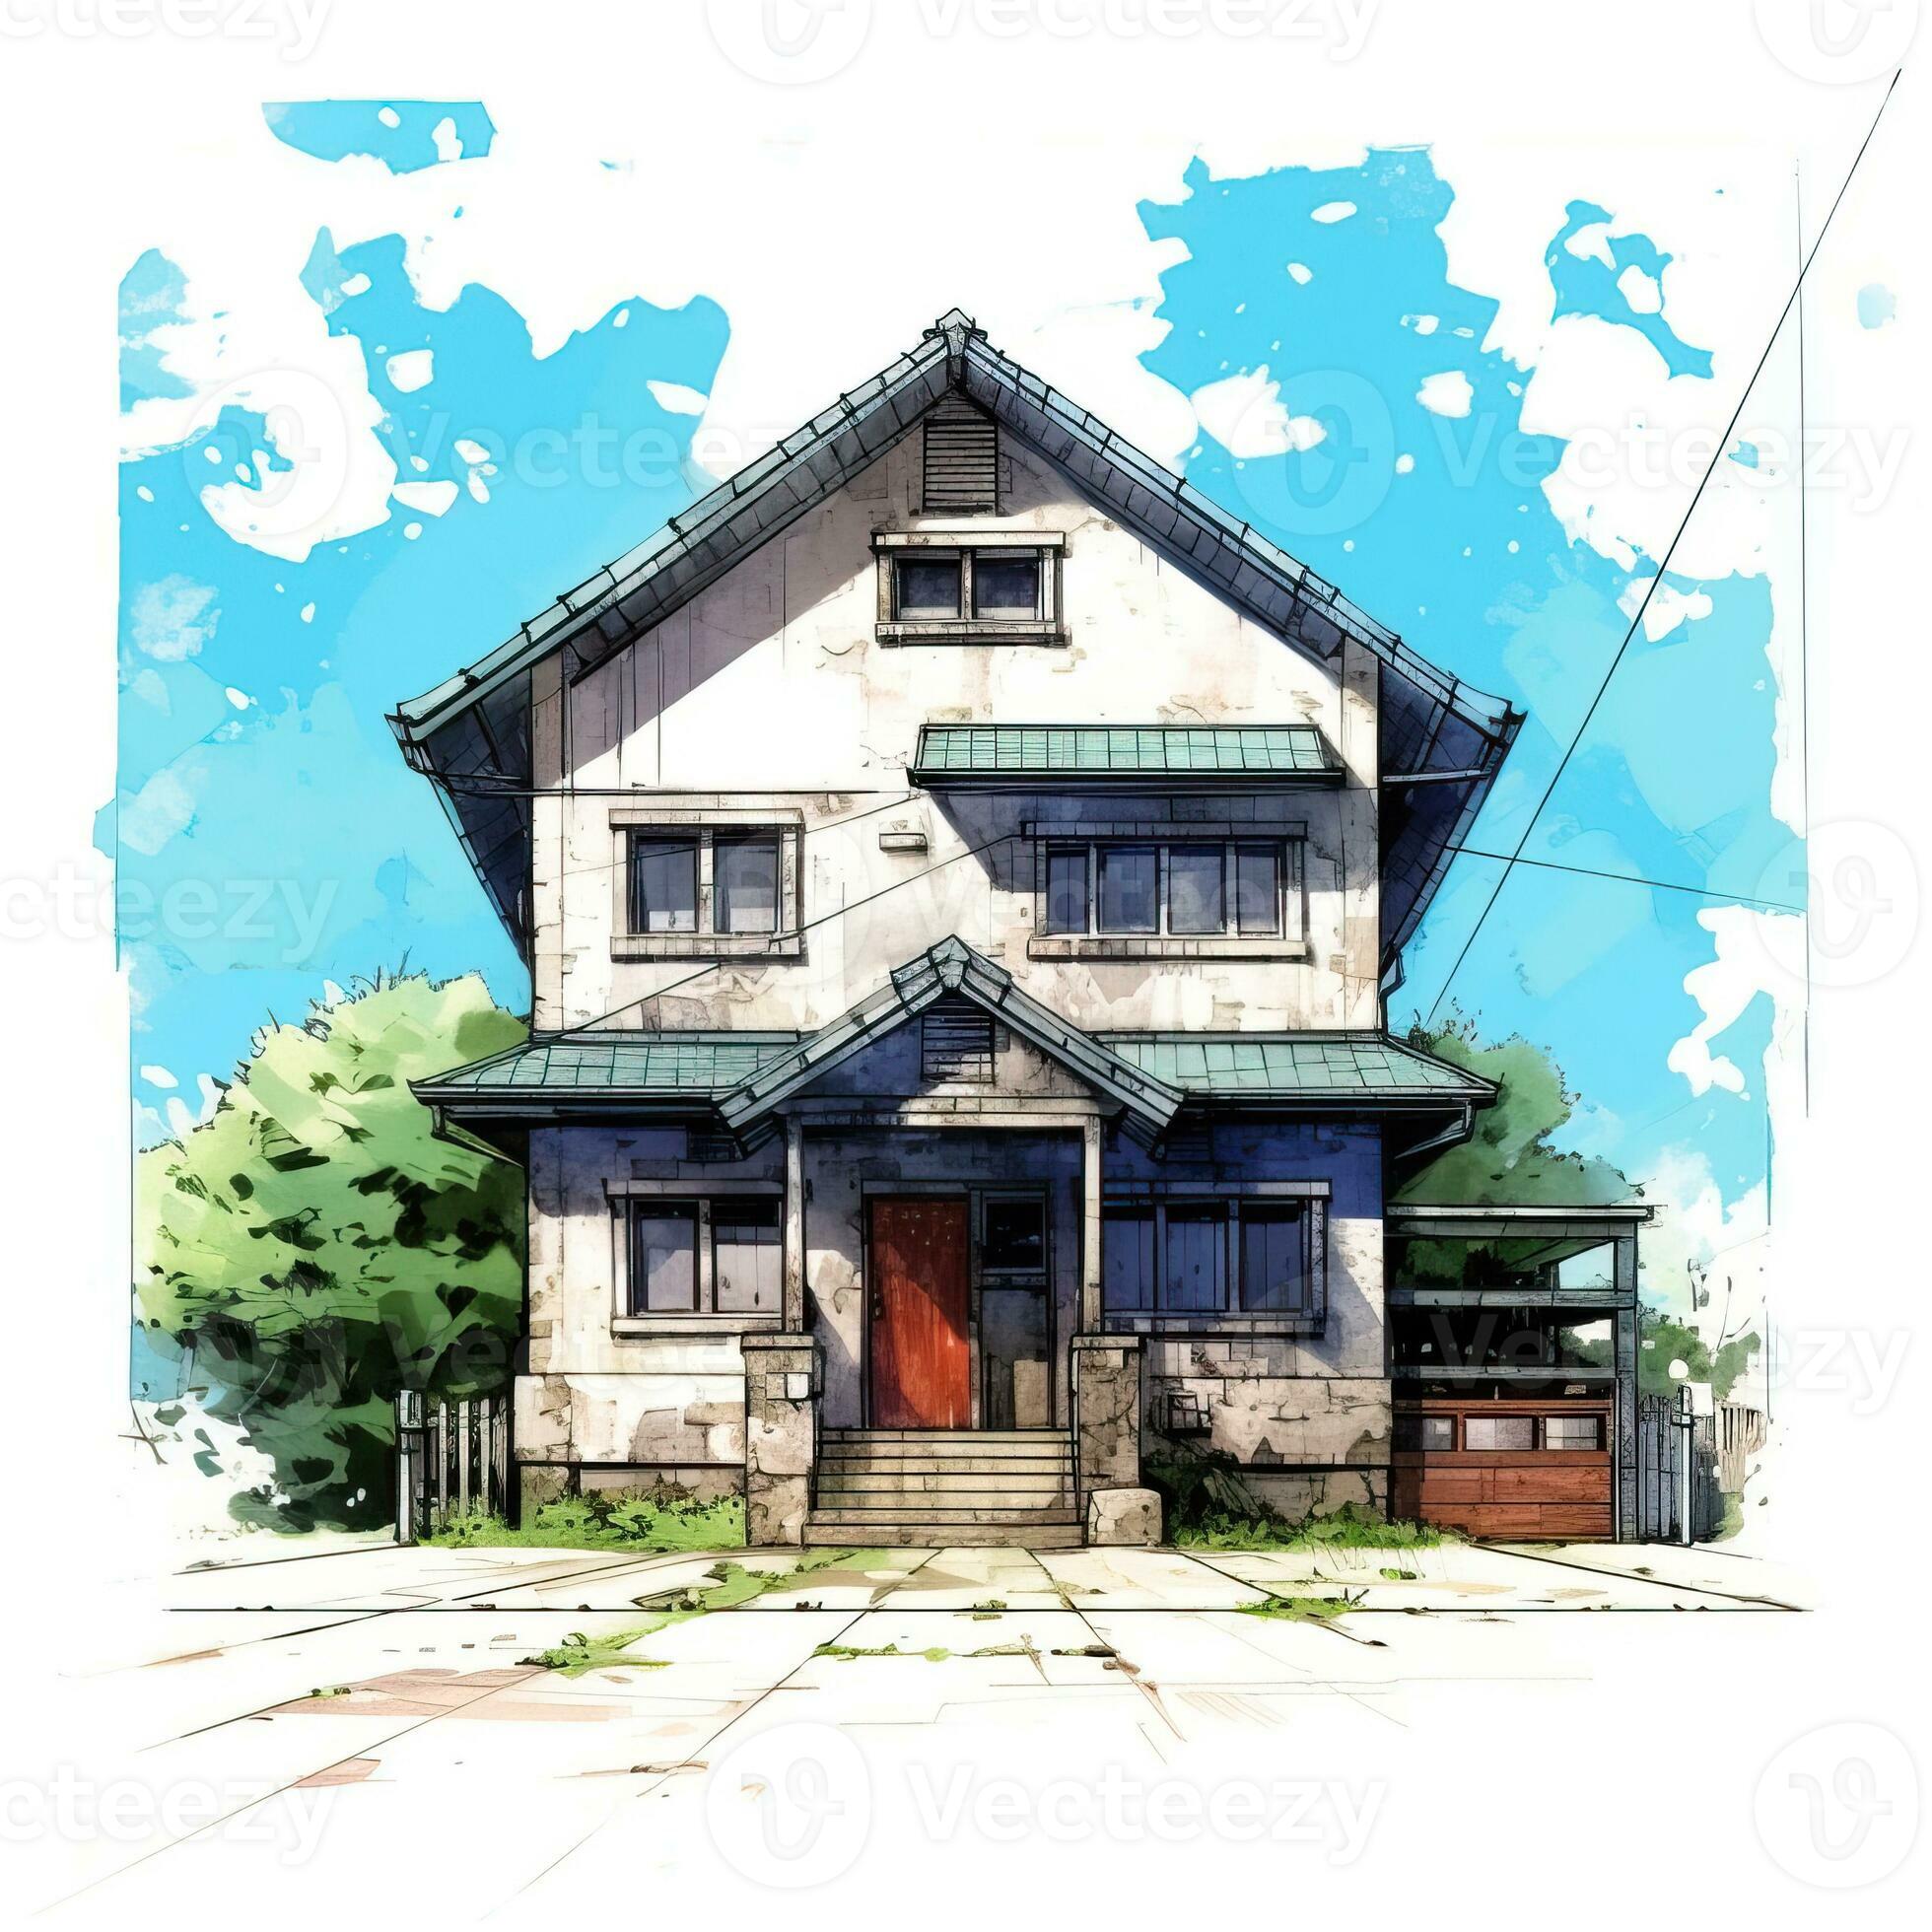 Premium AI Image | Anime house with garden and water-demhanvico.com.vn